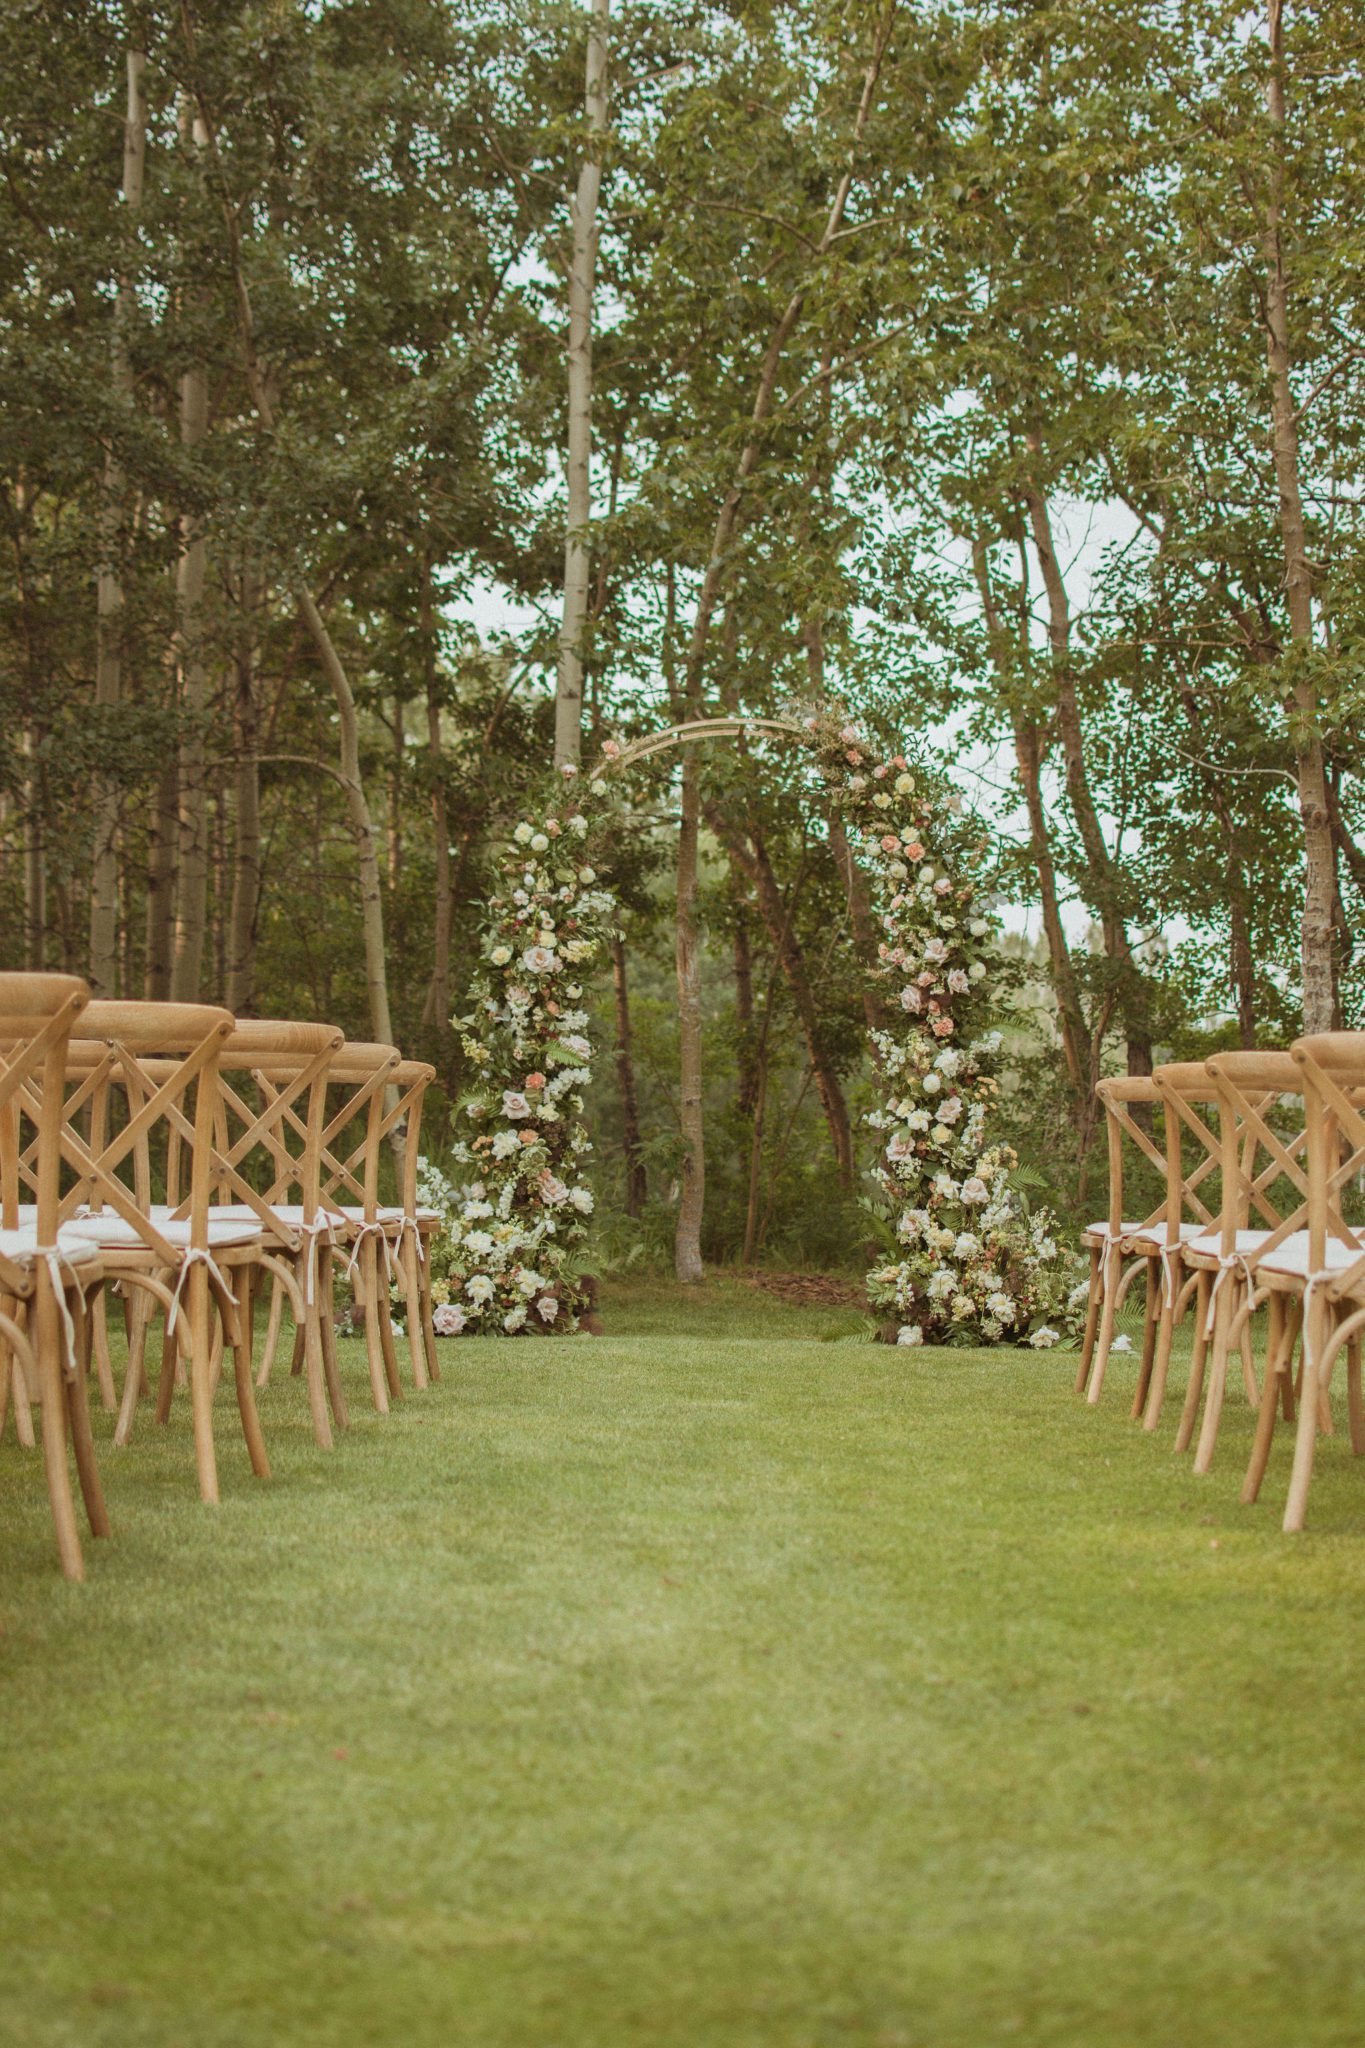 Dramatic floral arch by Meadow & Vine in Calgary, outdoor summer wedding decor ideas